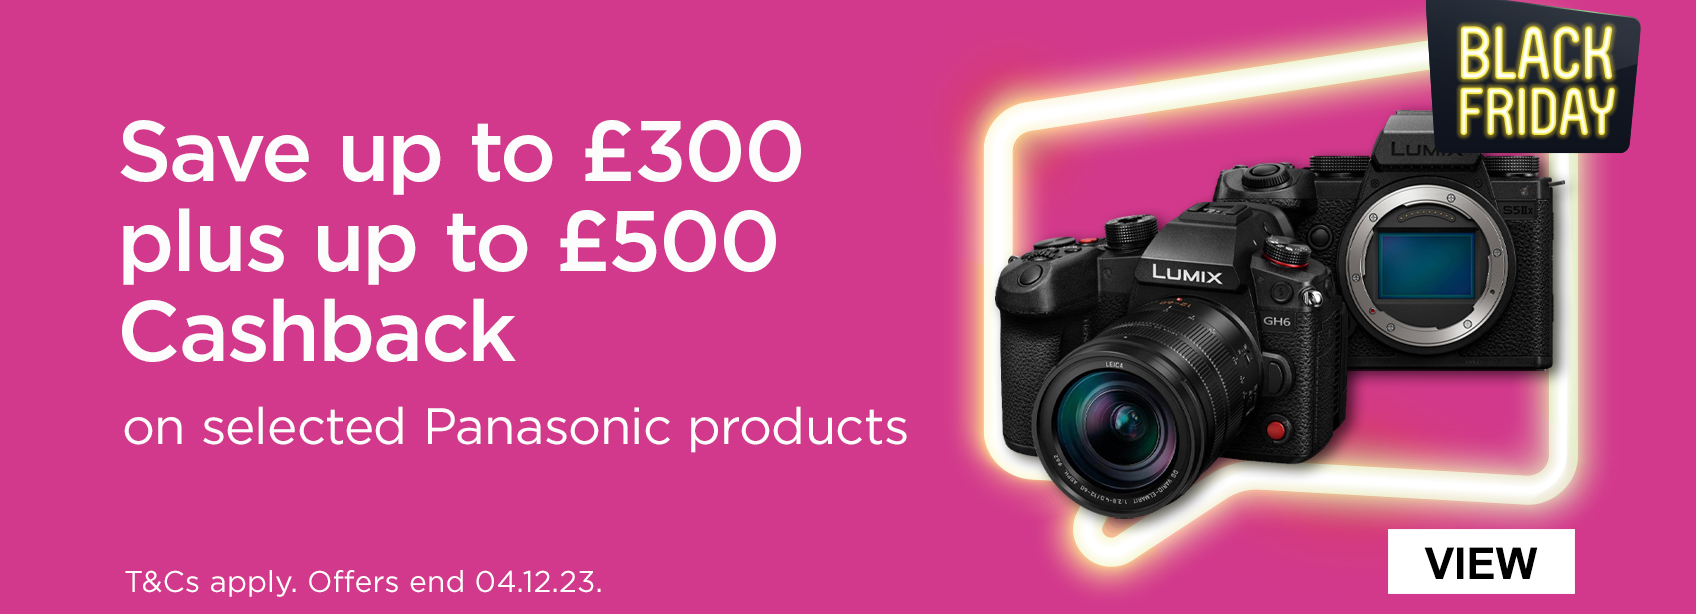 Save up to £300 plus up to £500 cashback on selected Panasonic products. T's and C's apply. offers end 4.12.23